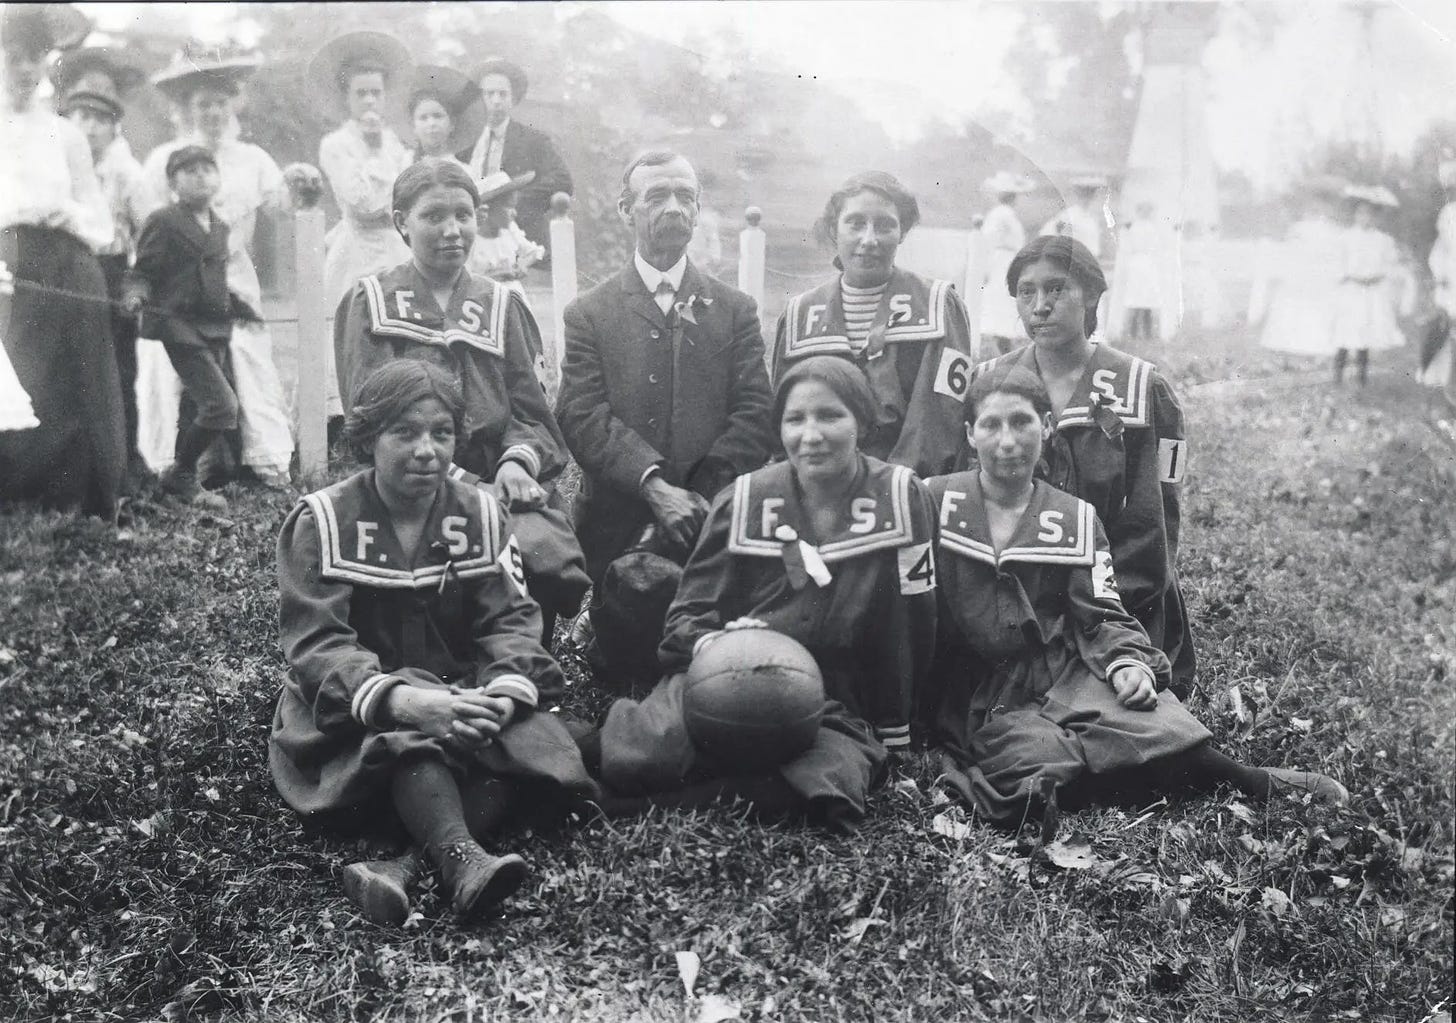 The Fort Shaw Indian School’s girls’ basketball team thrilled crowds at the 1904 St. Louis World’s Fair.Credit...